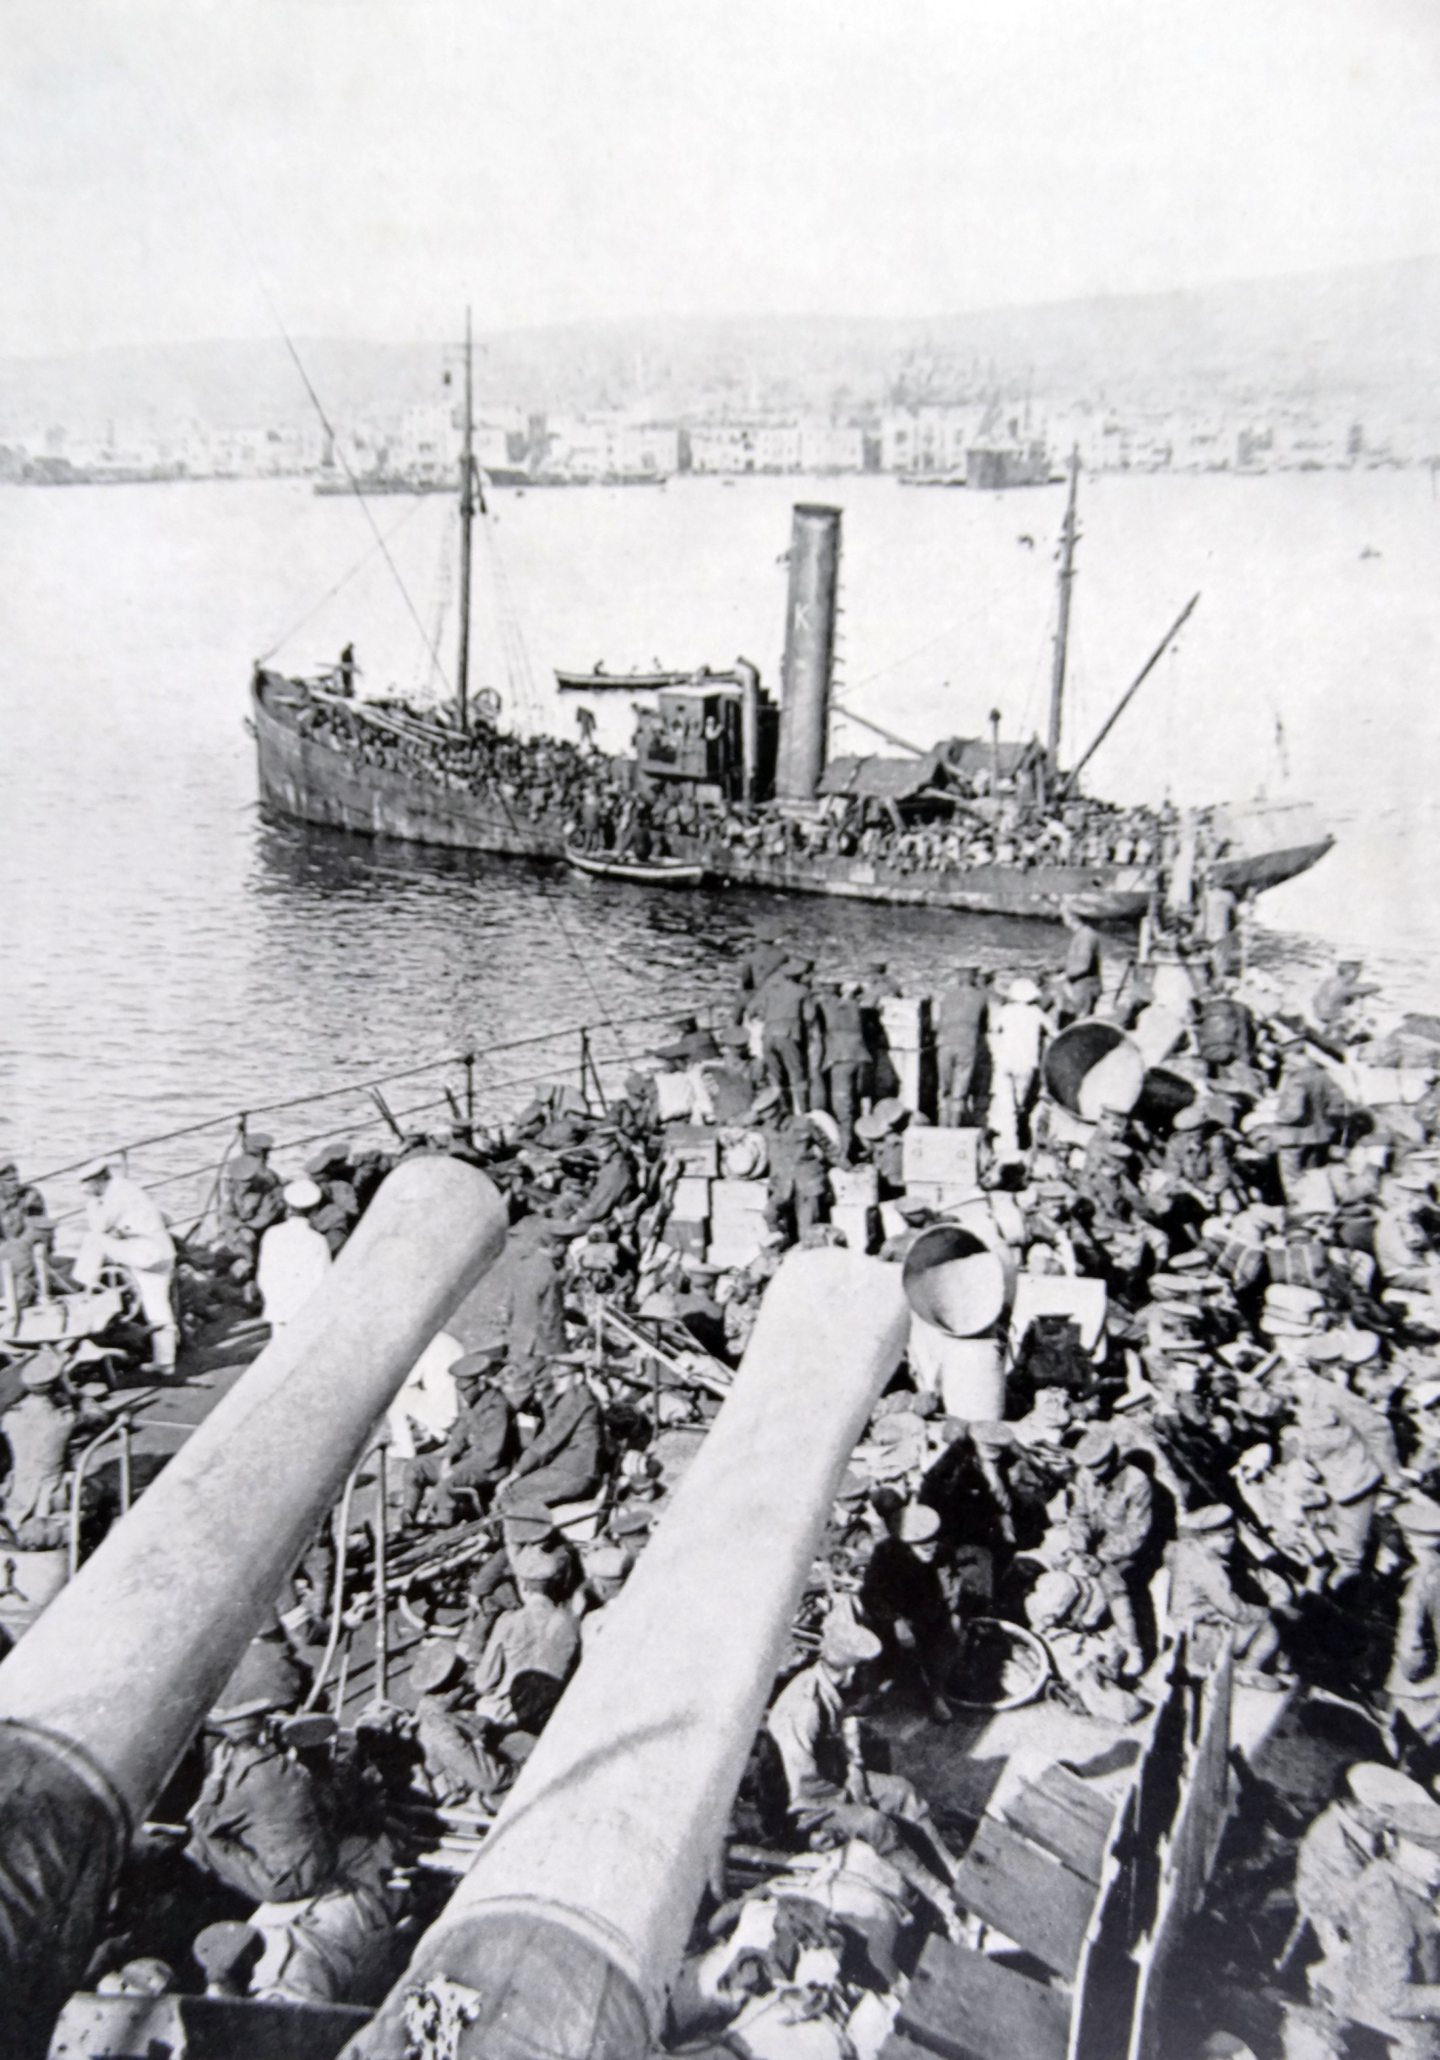 British soldiers evacuated from Gallipoli in 1915 are transferred to Salonika in Greece. 